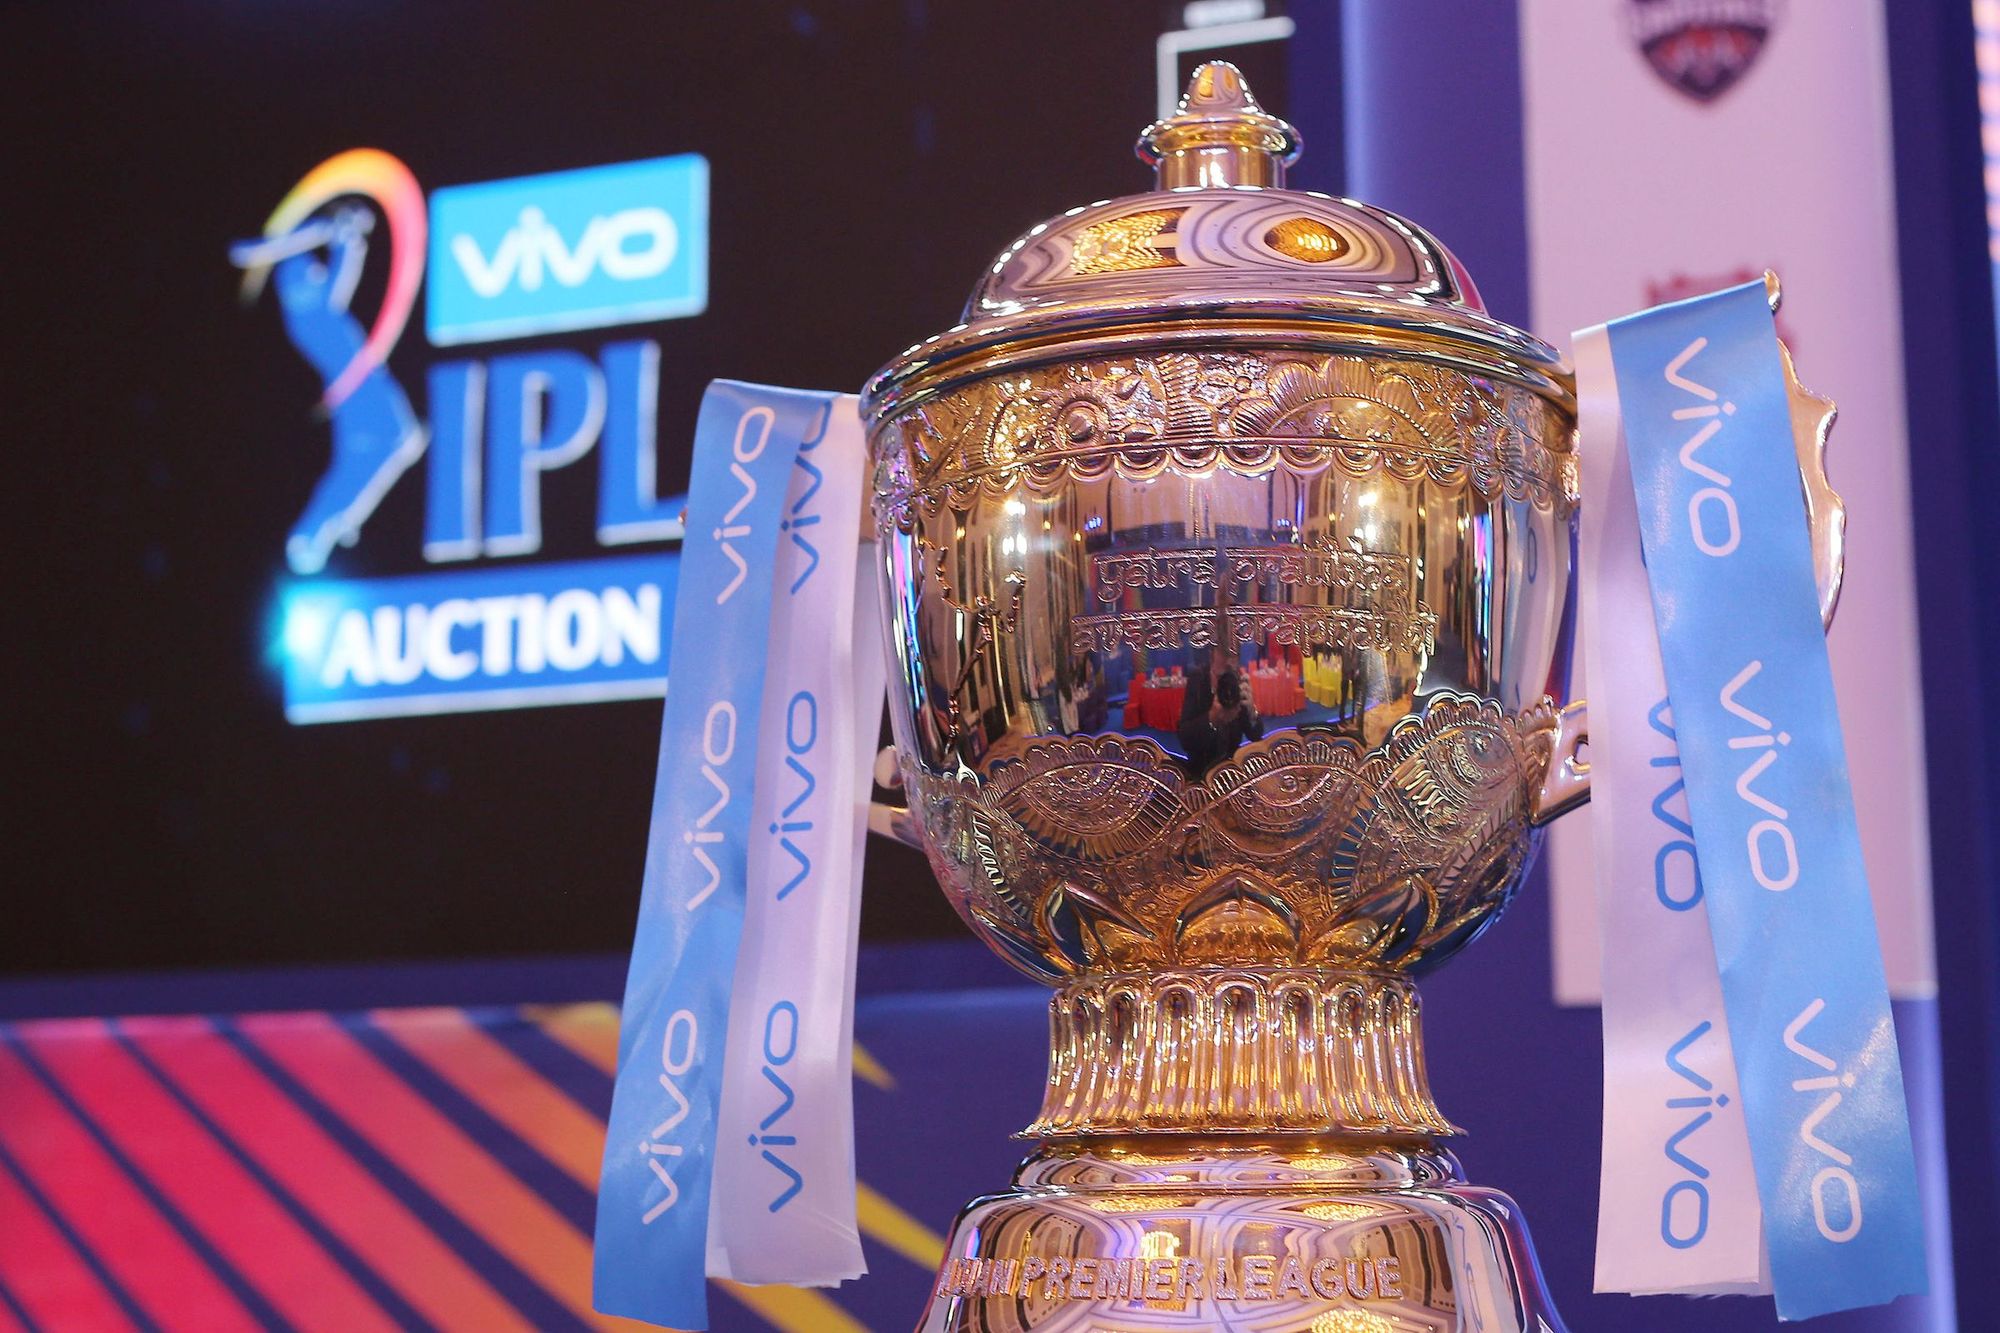 The IPL 2021 auction will take place on February 18